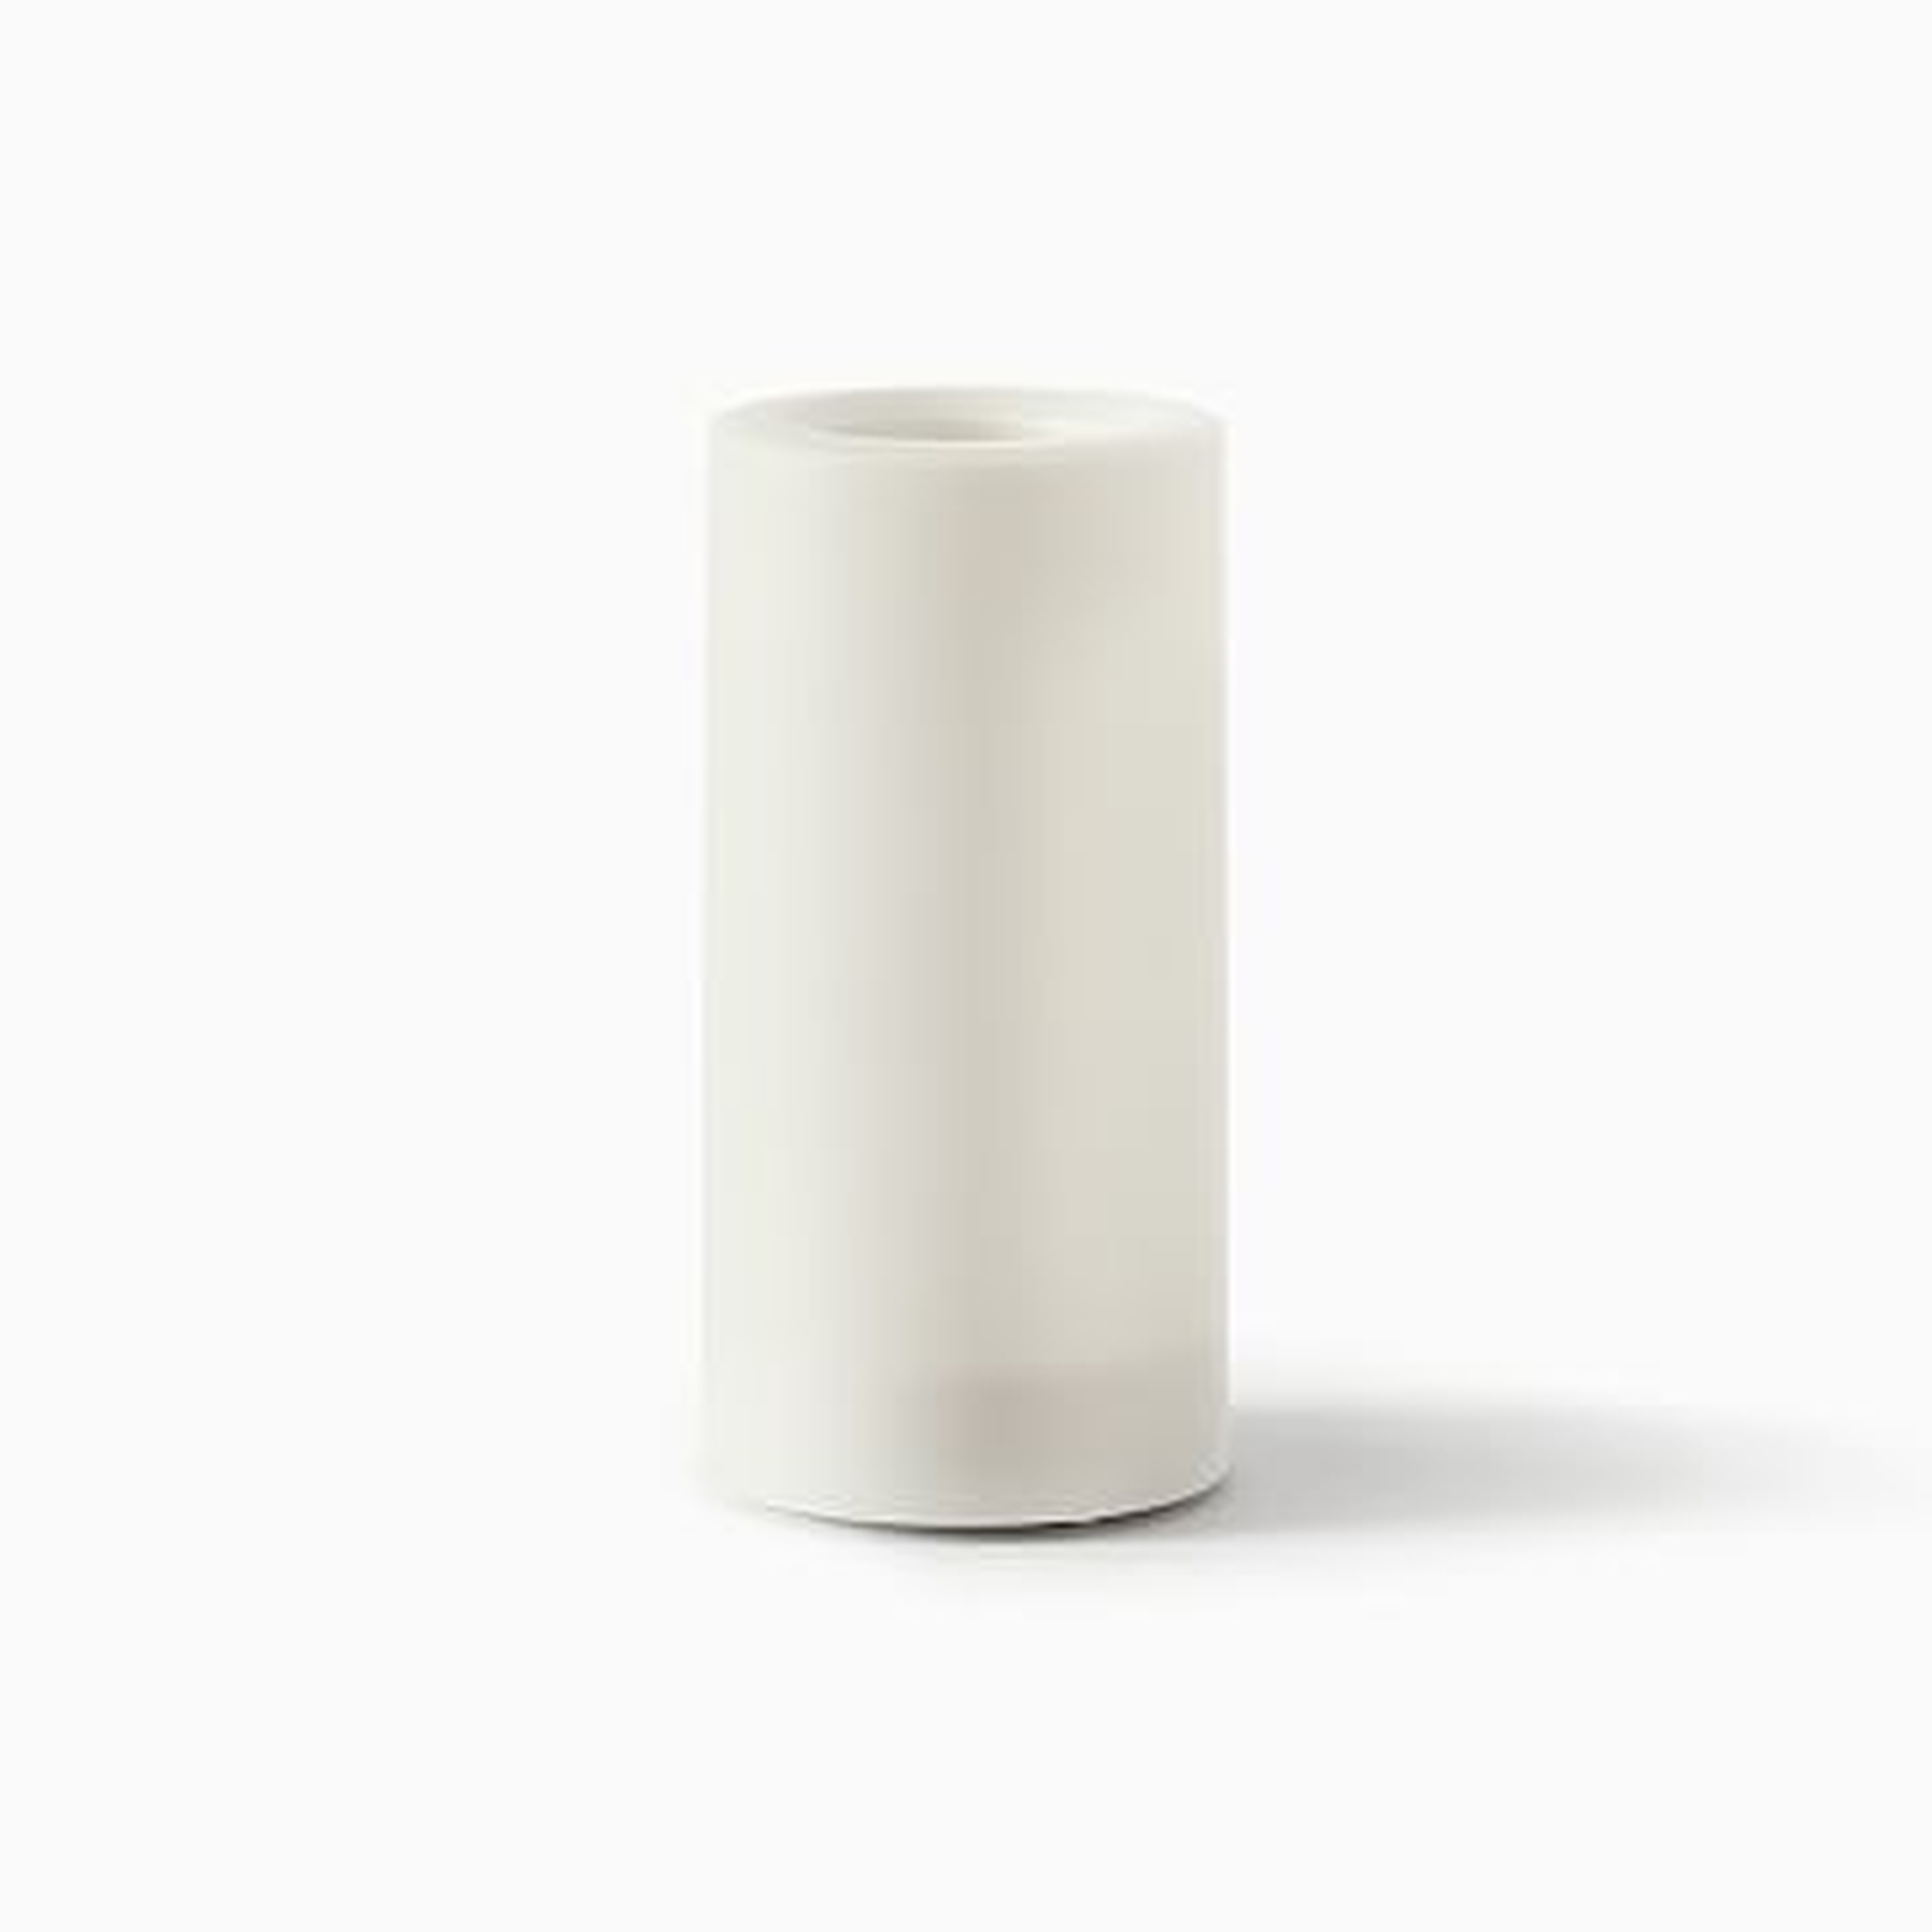 Flat Top Flicker Flameless Basic Candle, 3x6, 1 Wick, Unscented, White - West Elm